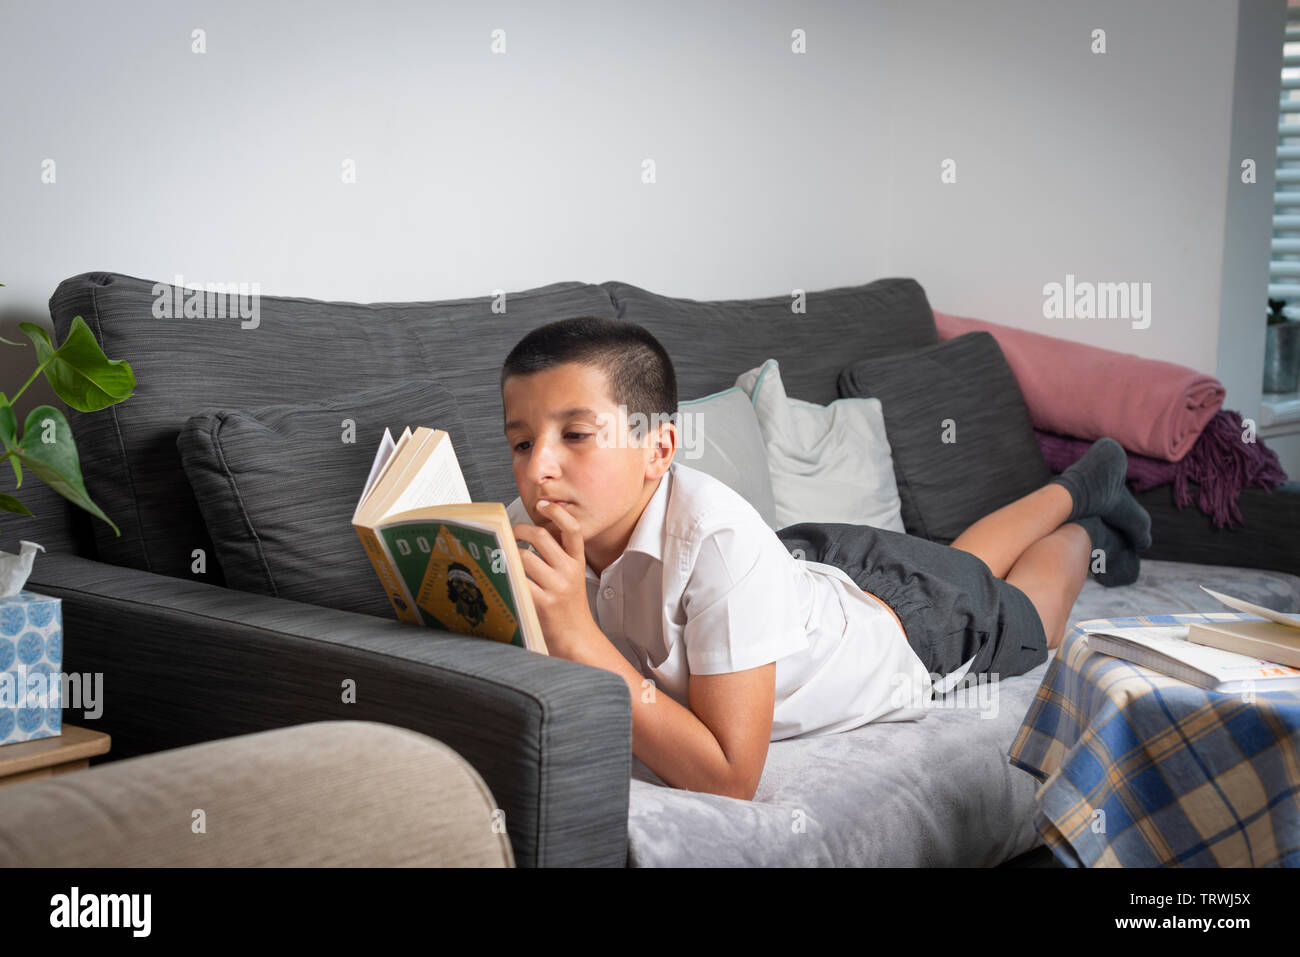 UK, Surrey- young boy 11 years old, in school uniform reading a library book at home Stock Photo